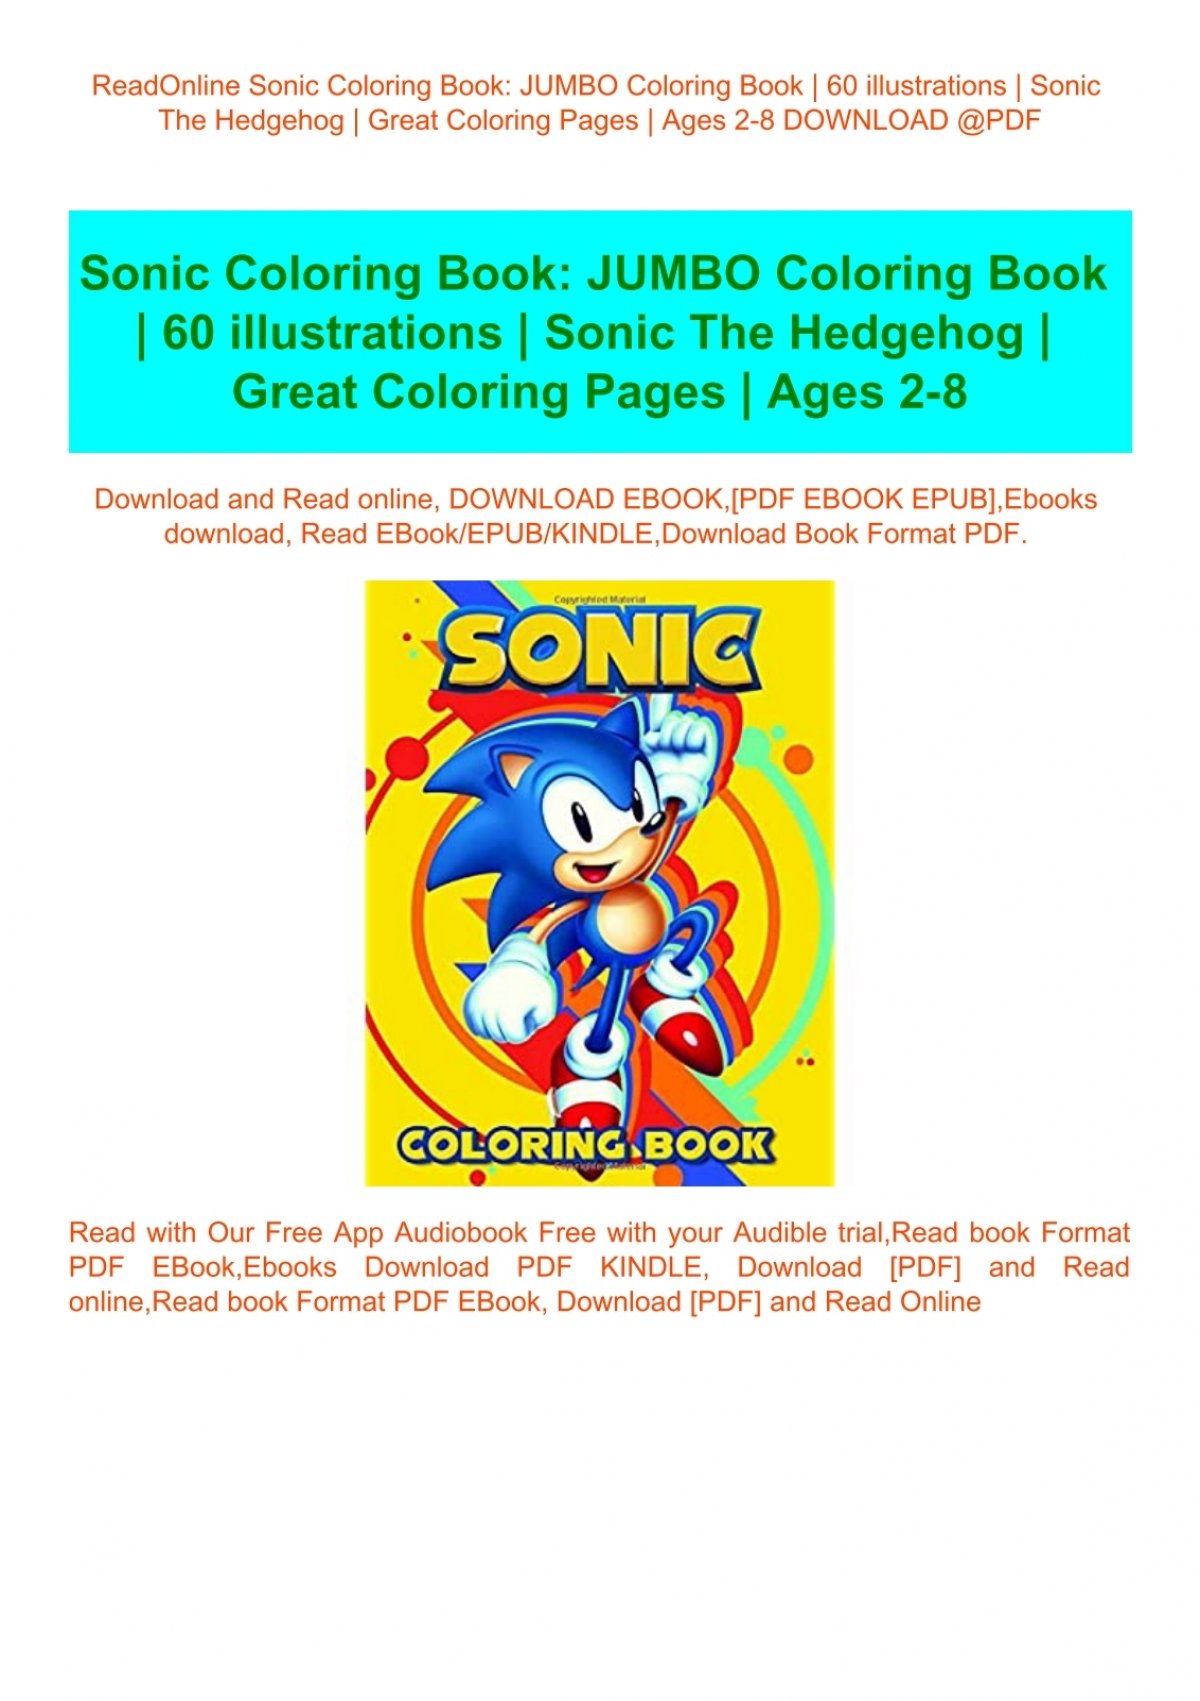 Readonline Sonic Coloring Book Jumbo Coloring Book 60 Illustrations Sonic The Hedgehog Great Coloring Pages Ages 2 8 Download Pdf